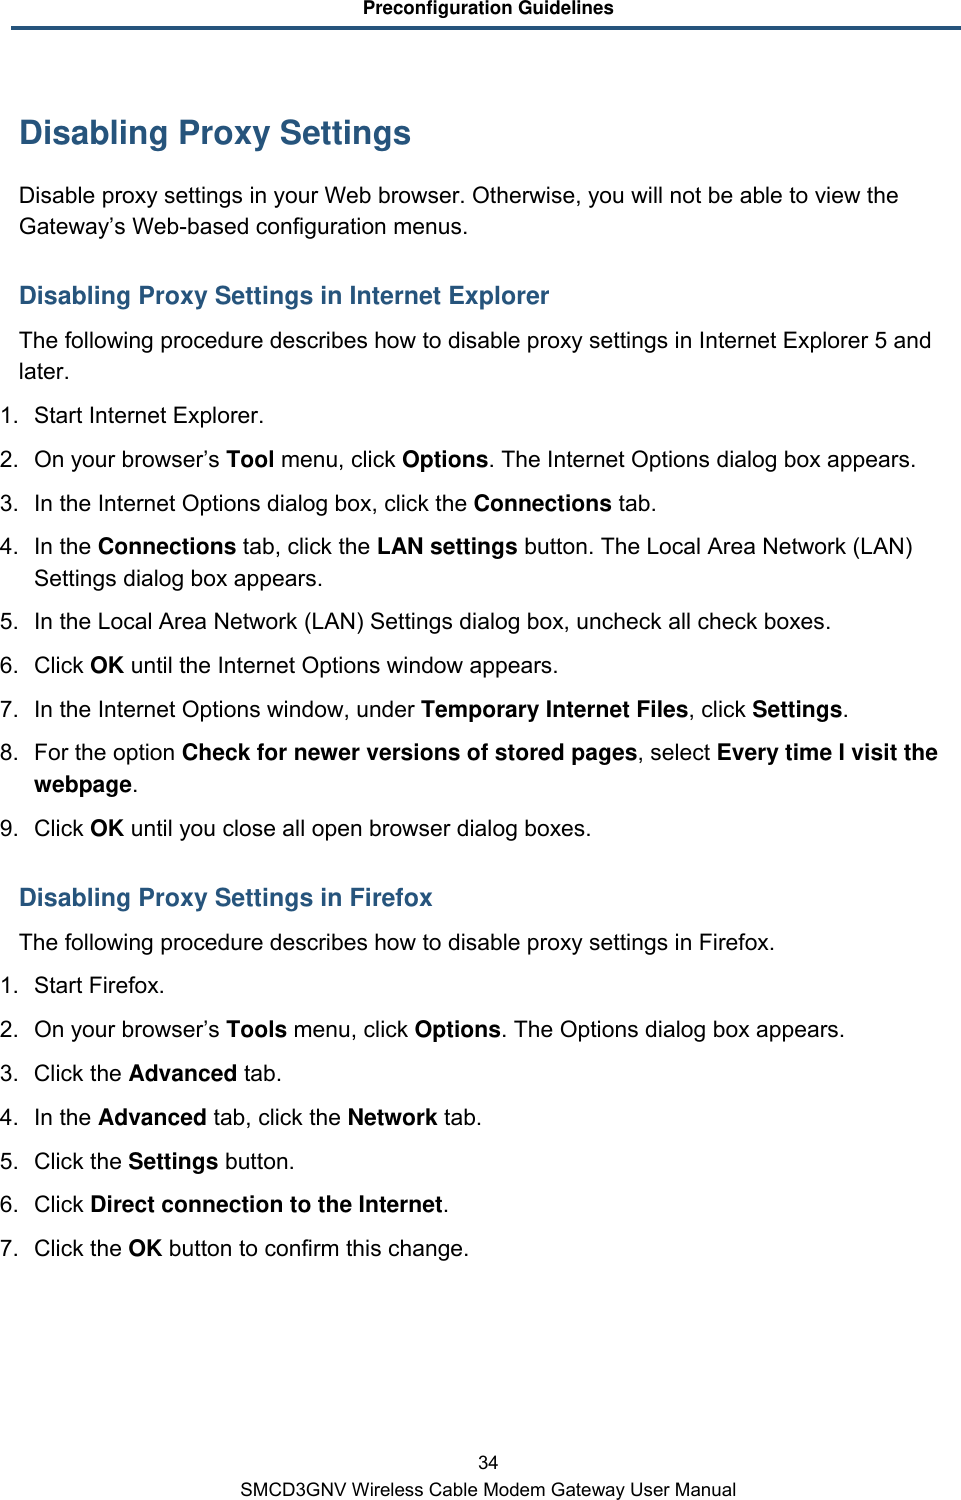 Preconfiguration Guidelines 34 SMCD3GNV Wireless Cable Modem Gateway User Manual Disabling Proxy Settings Disable proxy settings in your Web browser. Otherwise, you will not be able to view the Gateway’s Web-based configuration menus. Disabling Proxy Settings in Internet Explorer The following procedure describes how to disable proxy settings in Internet Explorer 5 and later.  1. Start Internet Explorer. 2. On your browser’s Tool menu, click Options. The Internet Options dialog box appears. 3. In the Internet Options dialog box, click the Connections tab. 4. In the Connections tab, click the LAN settings button. The Local Area Network (LAN) Settings dialog box appears. 5. In the Local Area Network (LAN) Settings dialog box, uncheck all check boxes. 6. Click OK until the Internet Options window appears. 7. In the Internet Options window, under Temporary Internet Files, click Settings. 8. For the option Check for newer versions of stored pages, select Every time I visit the webpage. 9. Click OK until you close all open browser dialog boxes. Disabling Proxy Settings in Firefox The following procedure describes how to disable proxy settings in Firefox. 1. Start Firefox. 2. On your browser’s Tools menu, click Options. The Options dialog box appears. 3. Click the Advanced tab.  4. In the Advanced tab, click the Network tab. 5. Click the Settings button. 6. Click Direct connection to the Internet. 7.  Click the OK button to confirm this change. 